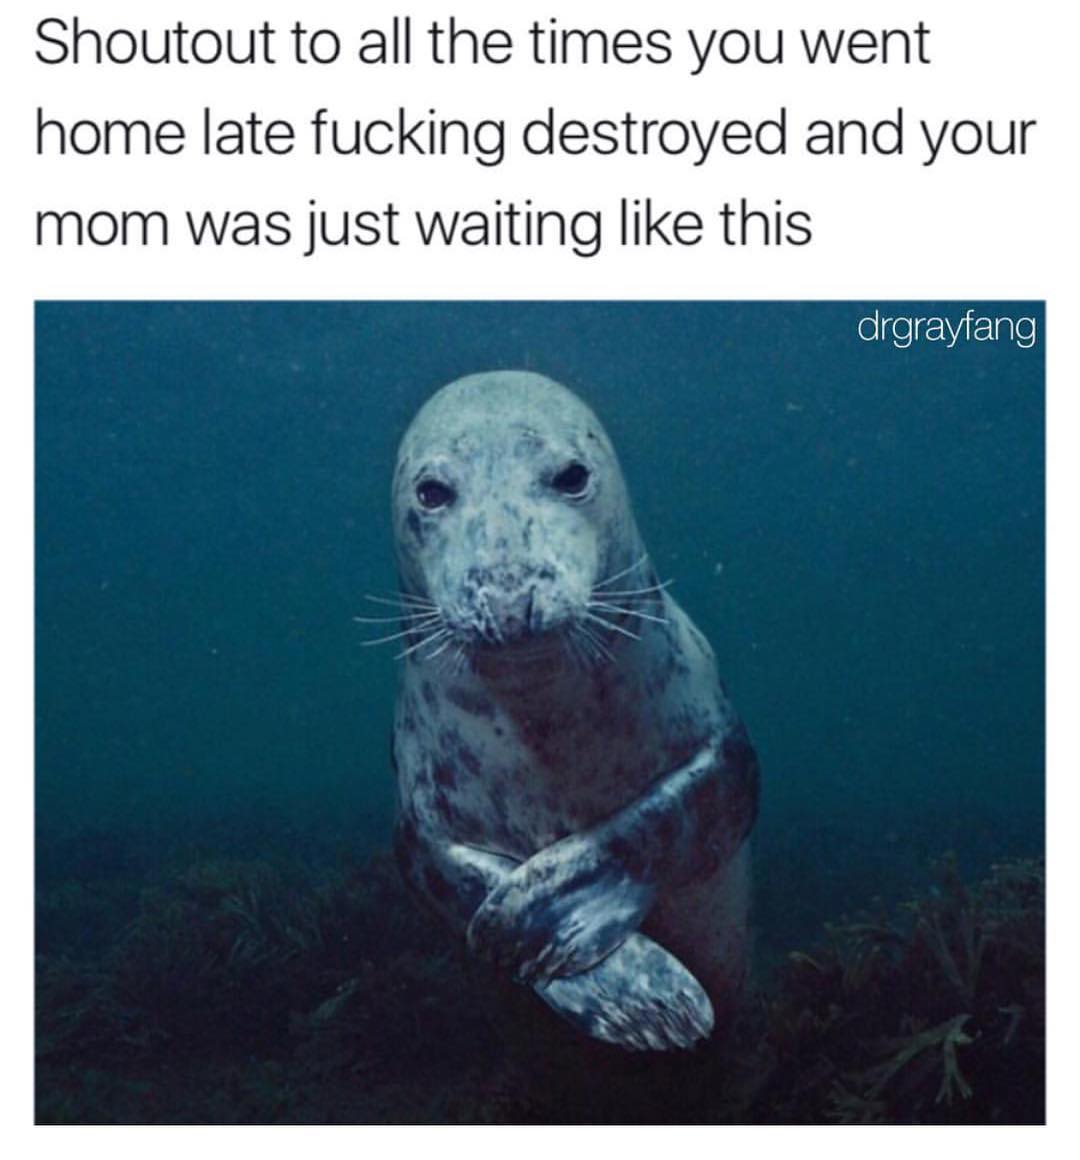 Shoutout To All The Times You Went Home Late Fucking Destroyed And Your Mom Was Just Waiting